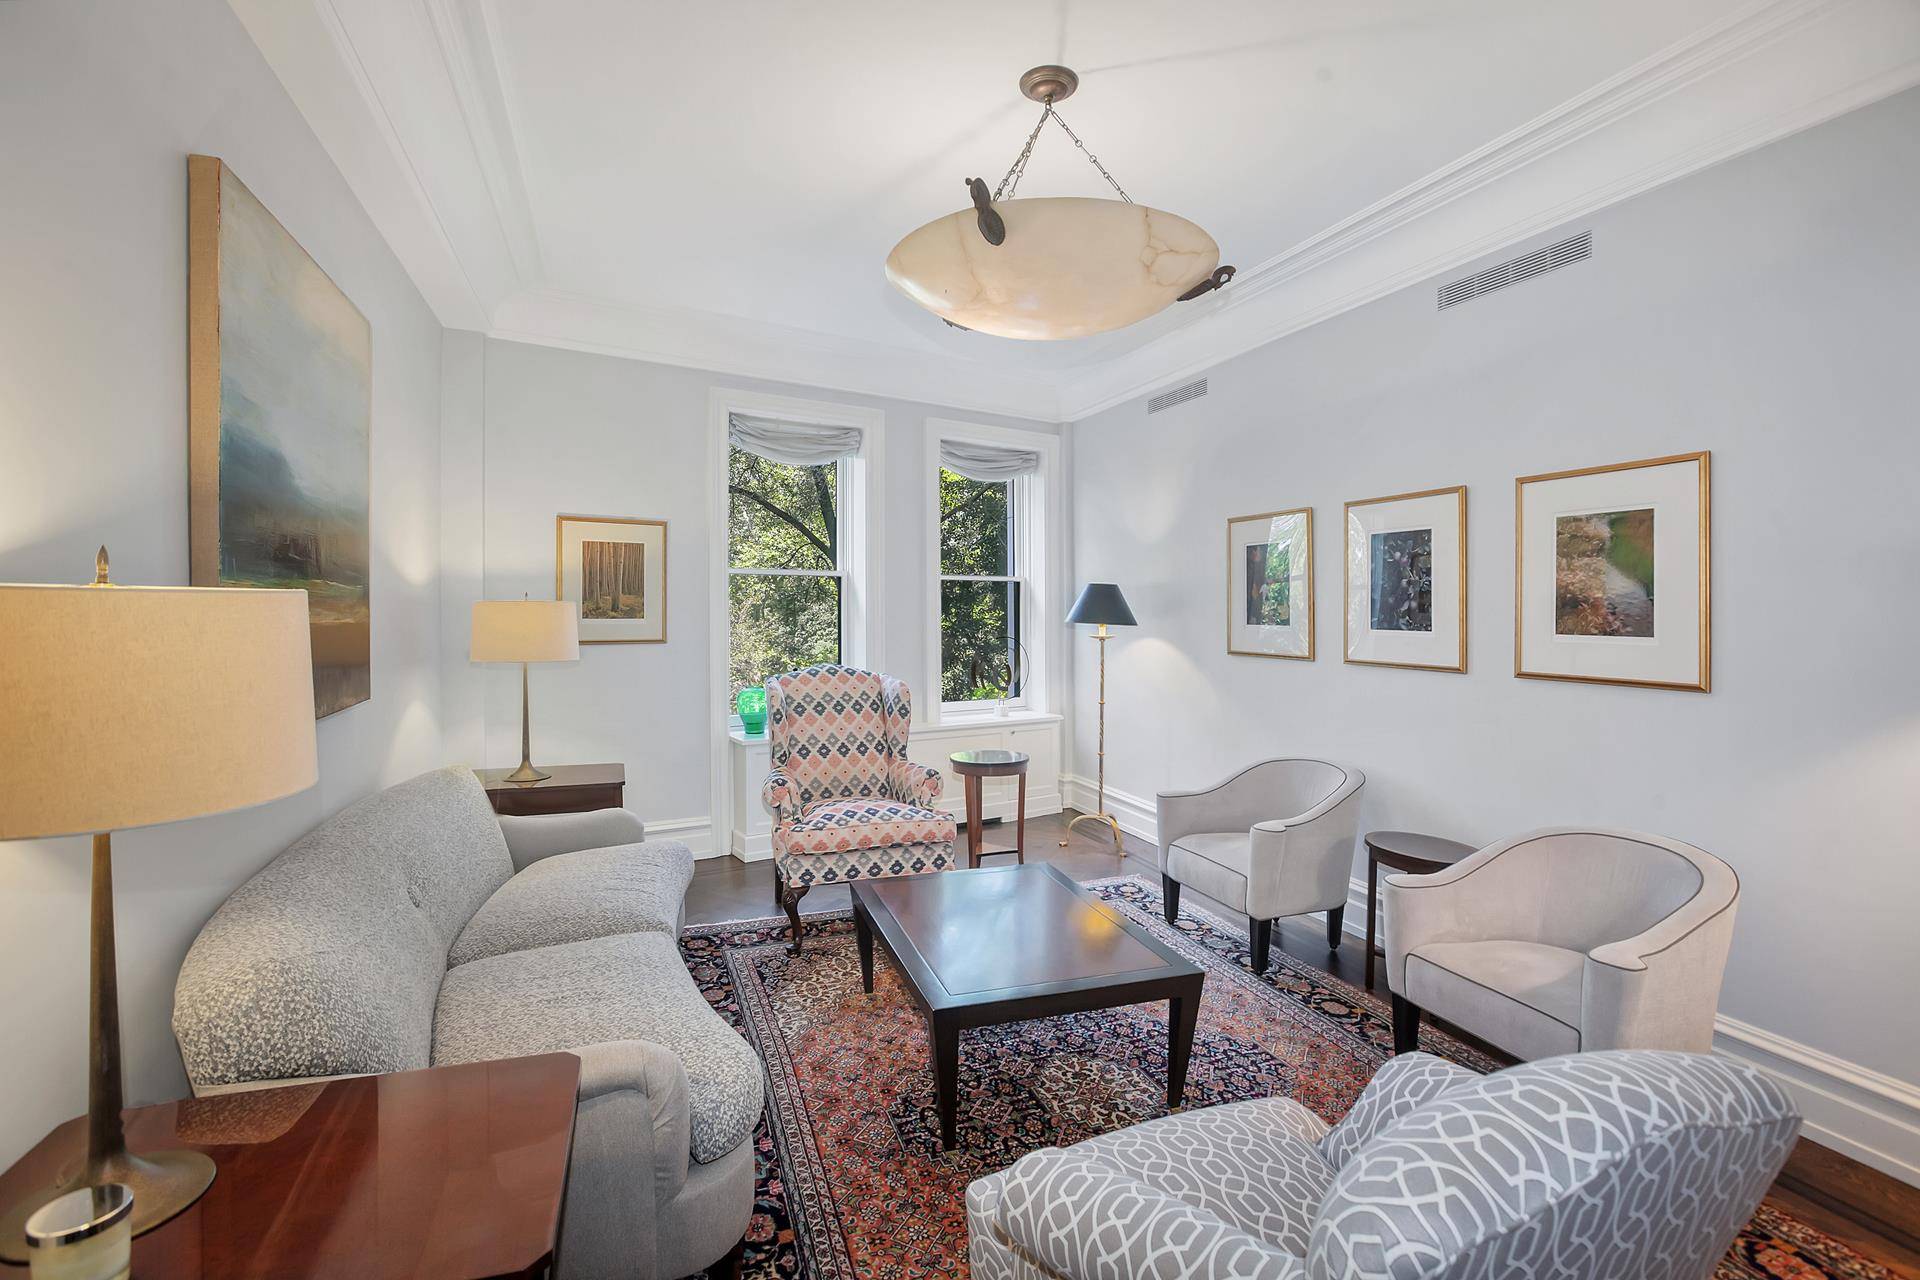 An undoubtedly rare offering, this exceptional, 6 room, expansive, 2, 000 sqft home abounds with tree lined, seasonal Hudson River views and direct views of Riverside Park.